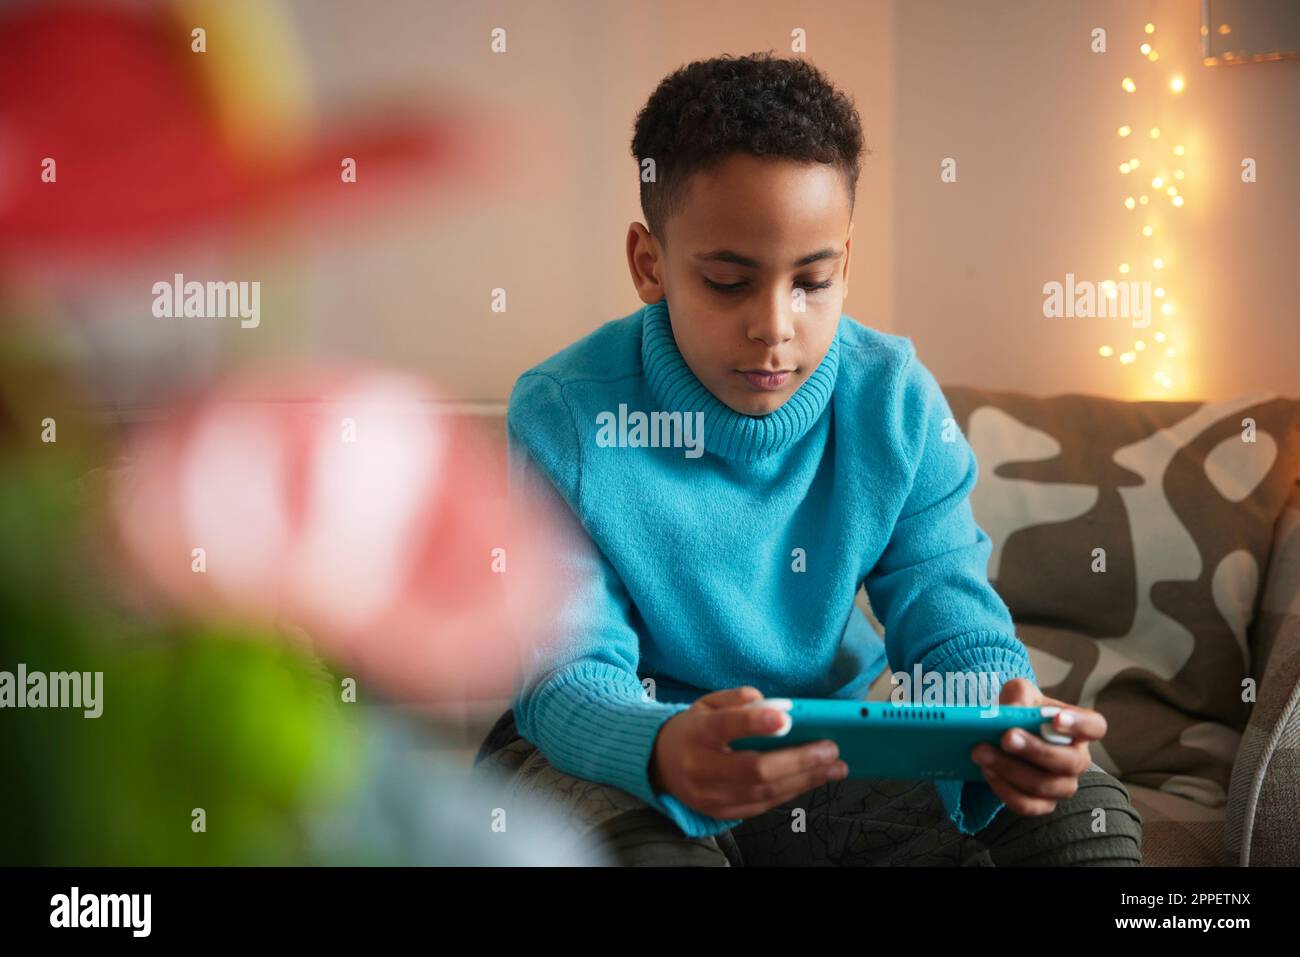 Boy playing video games at home Stock Photo